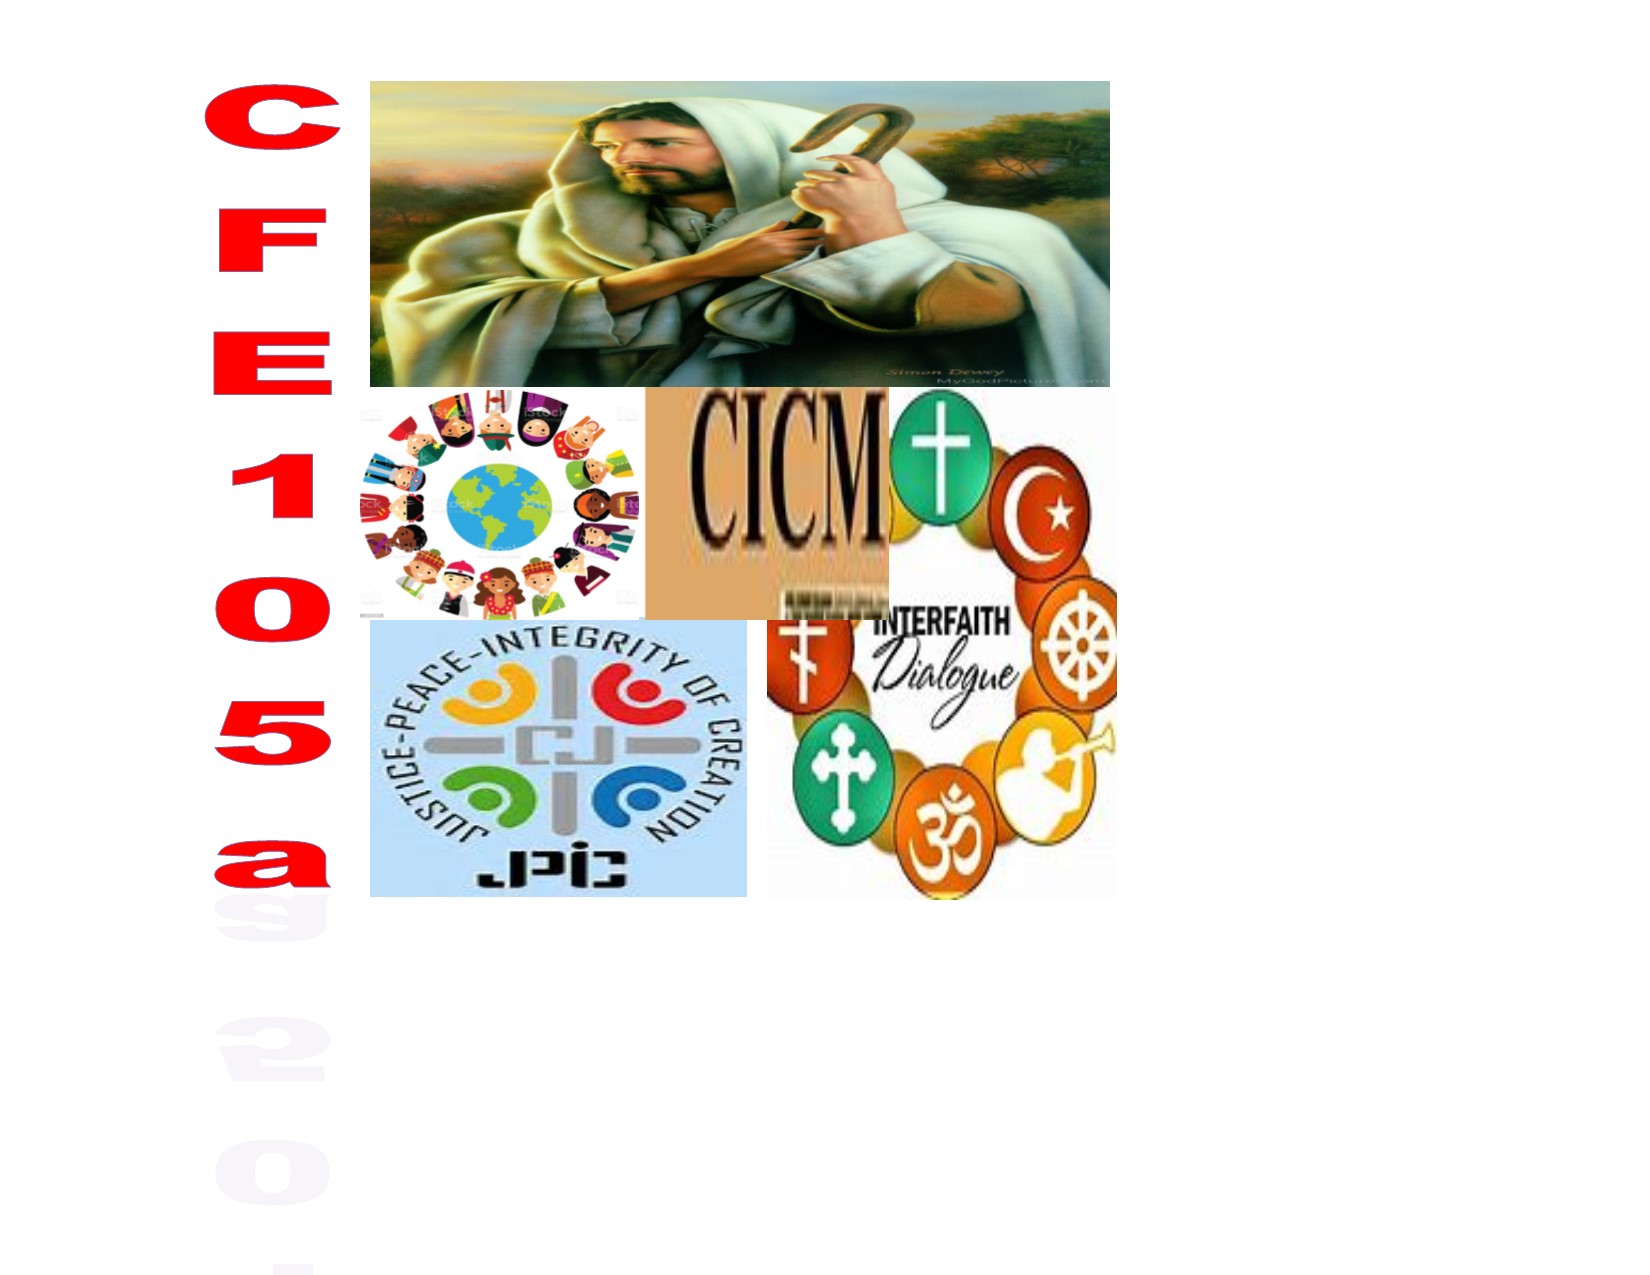 CFE 105a [3111] CICM in Action: Justice, Peace and Integrity of Creation; Indigenous Peoples; Interreligious Dialogu